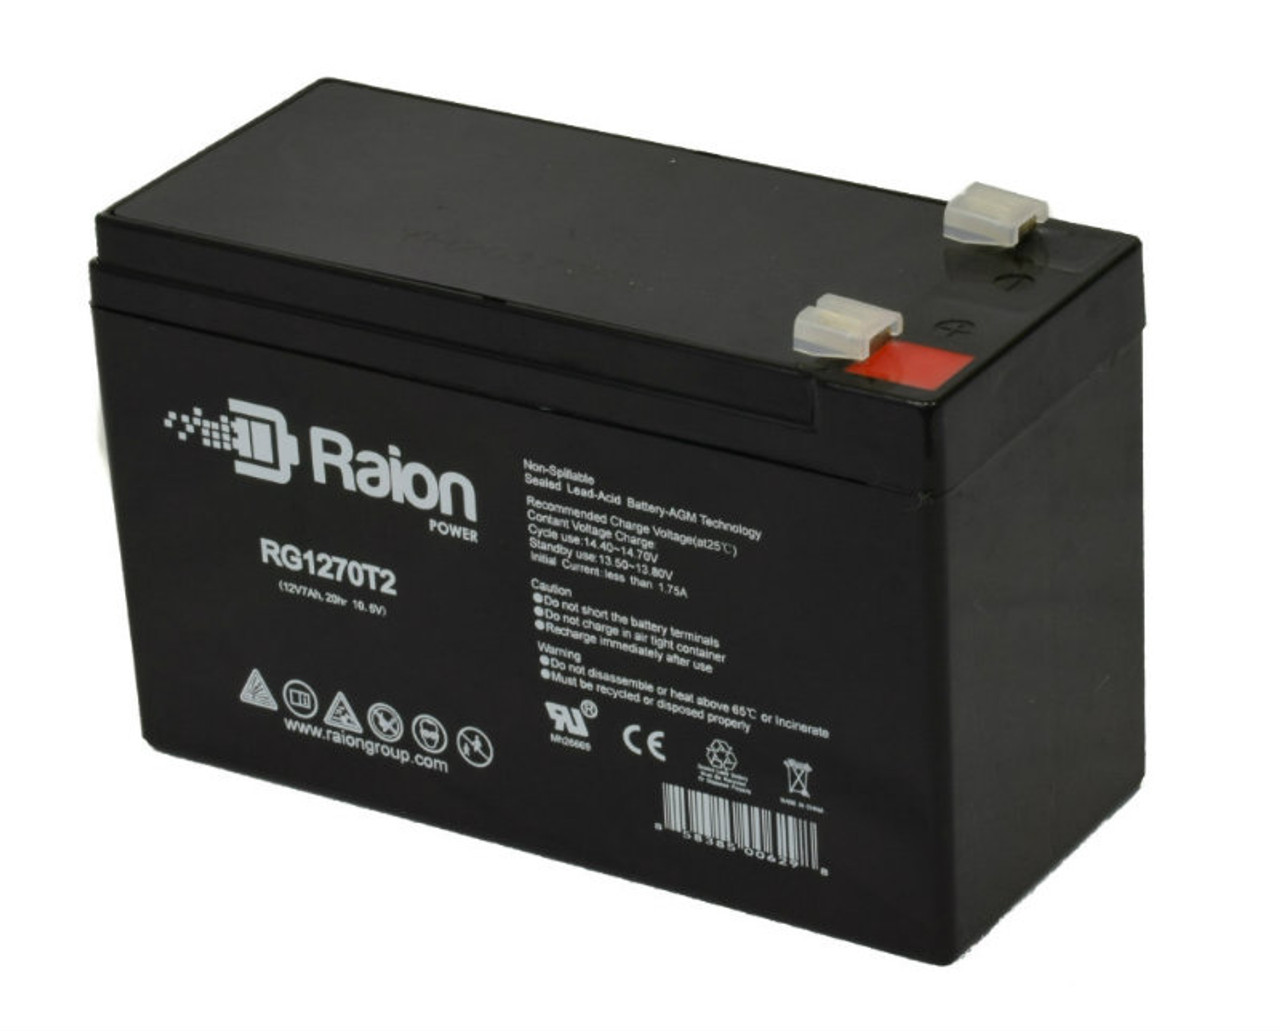 Raion Power RG1270T2 12V 7Ah Rechargeable Battery for Douglas DBG12-7F